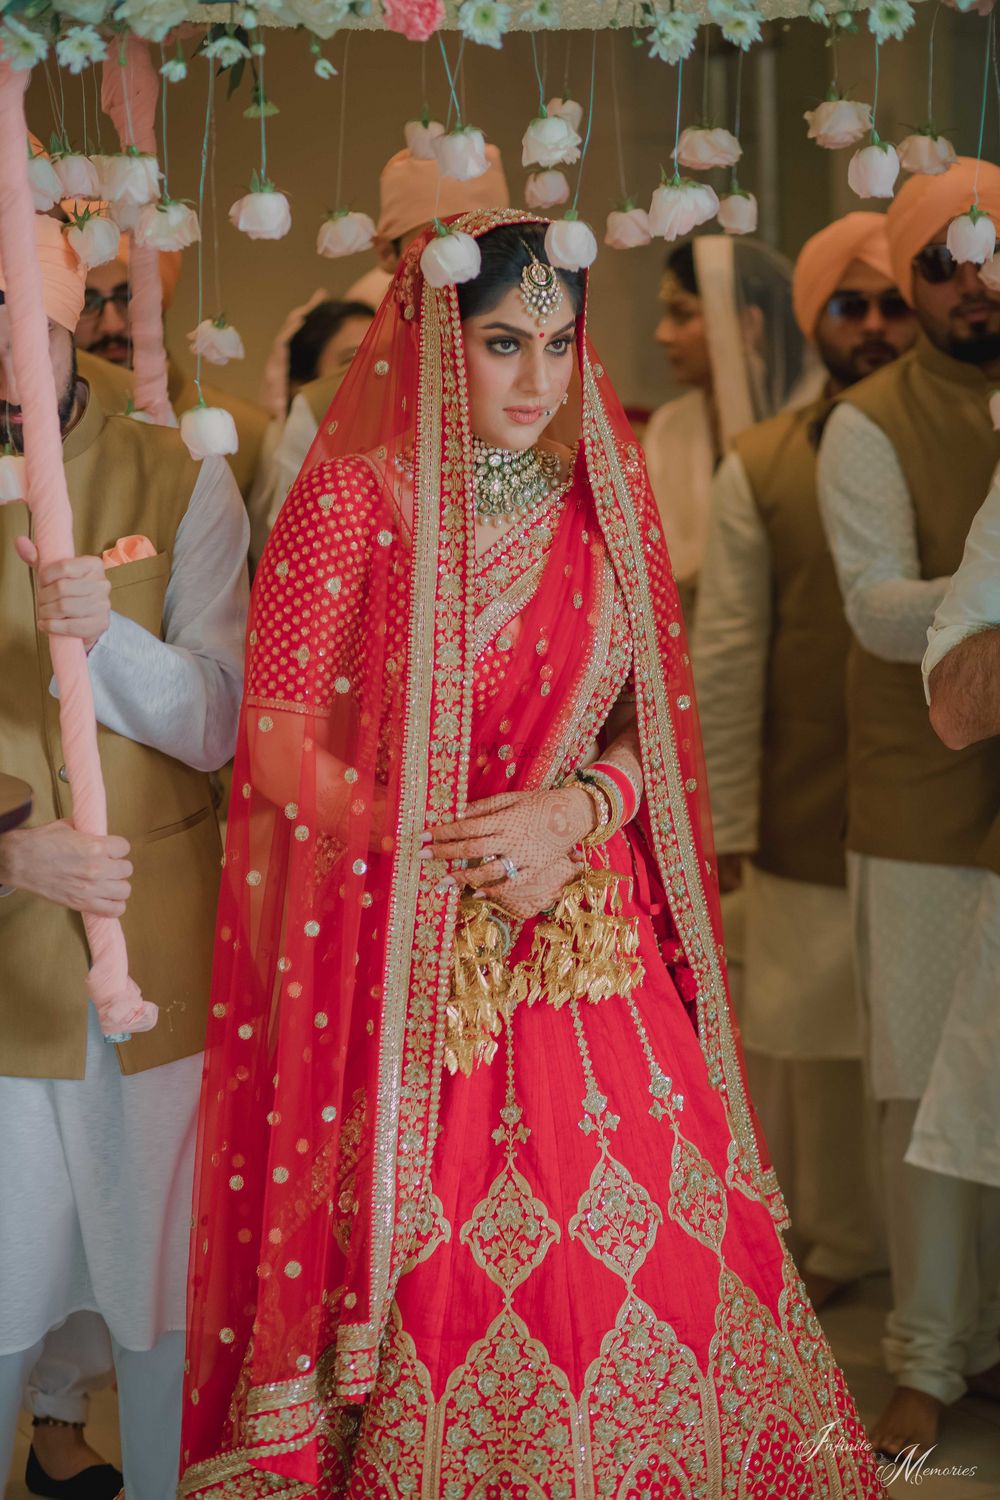 Photo of Bride entering with phoolon ki chadar with hanging roses